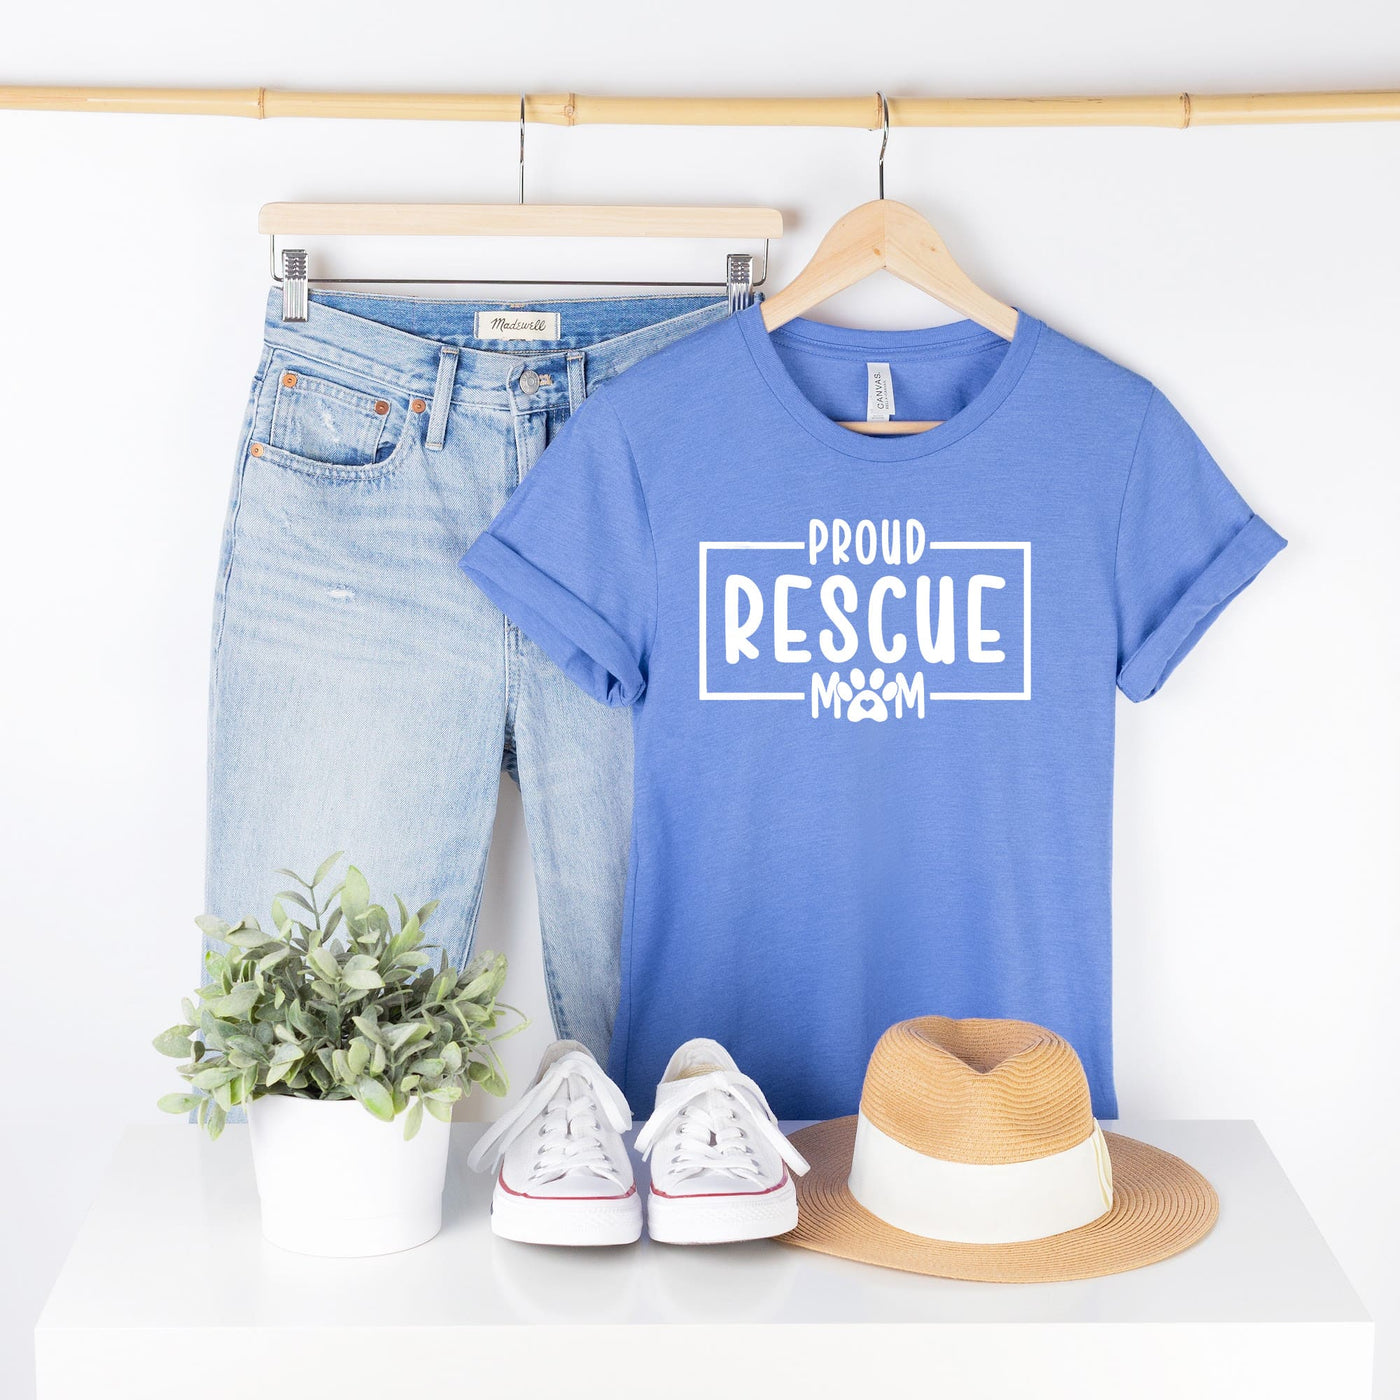 PROUD RESCUE MOM Shirt | People Shirts